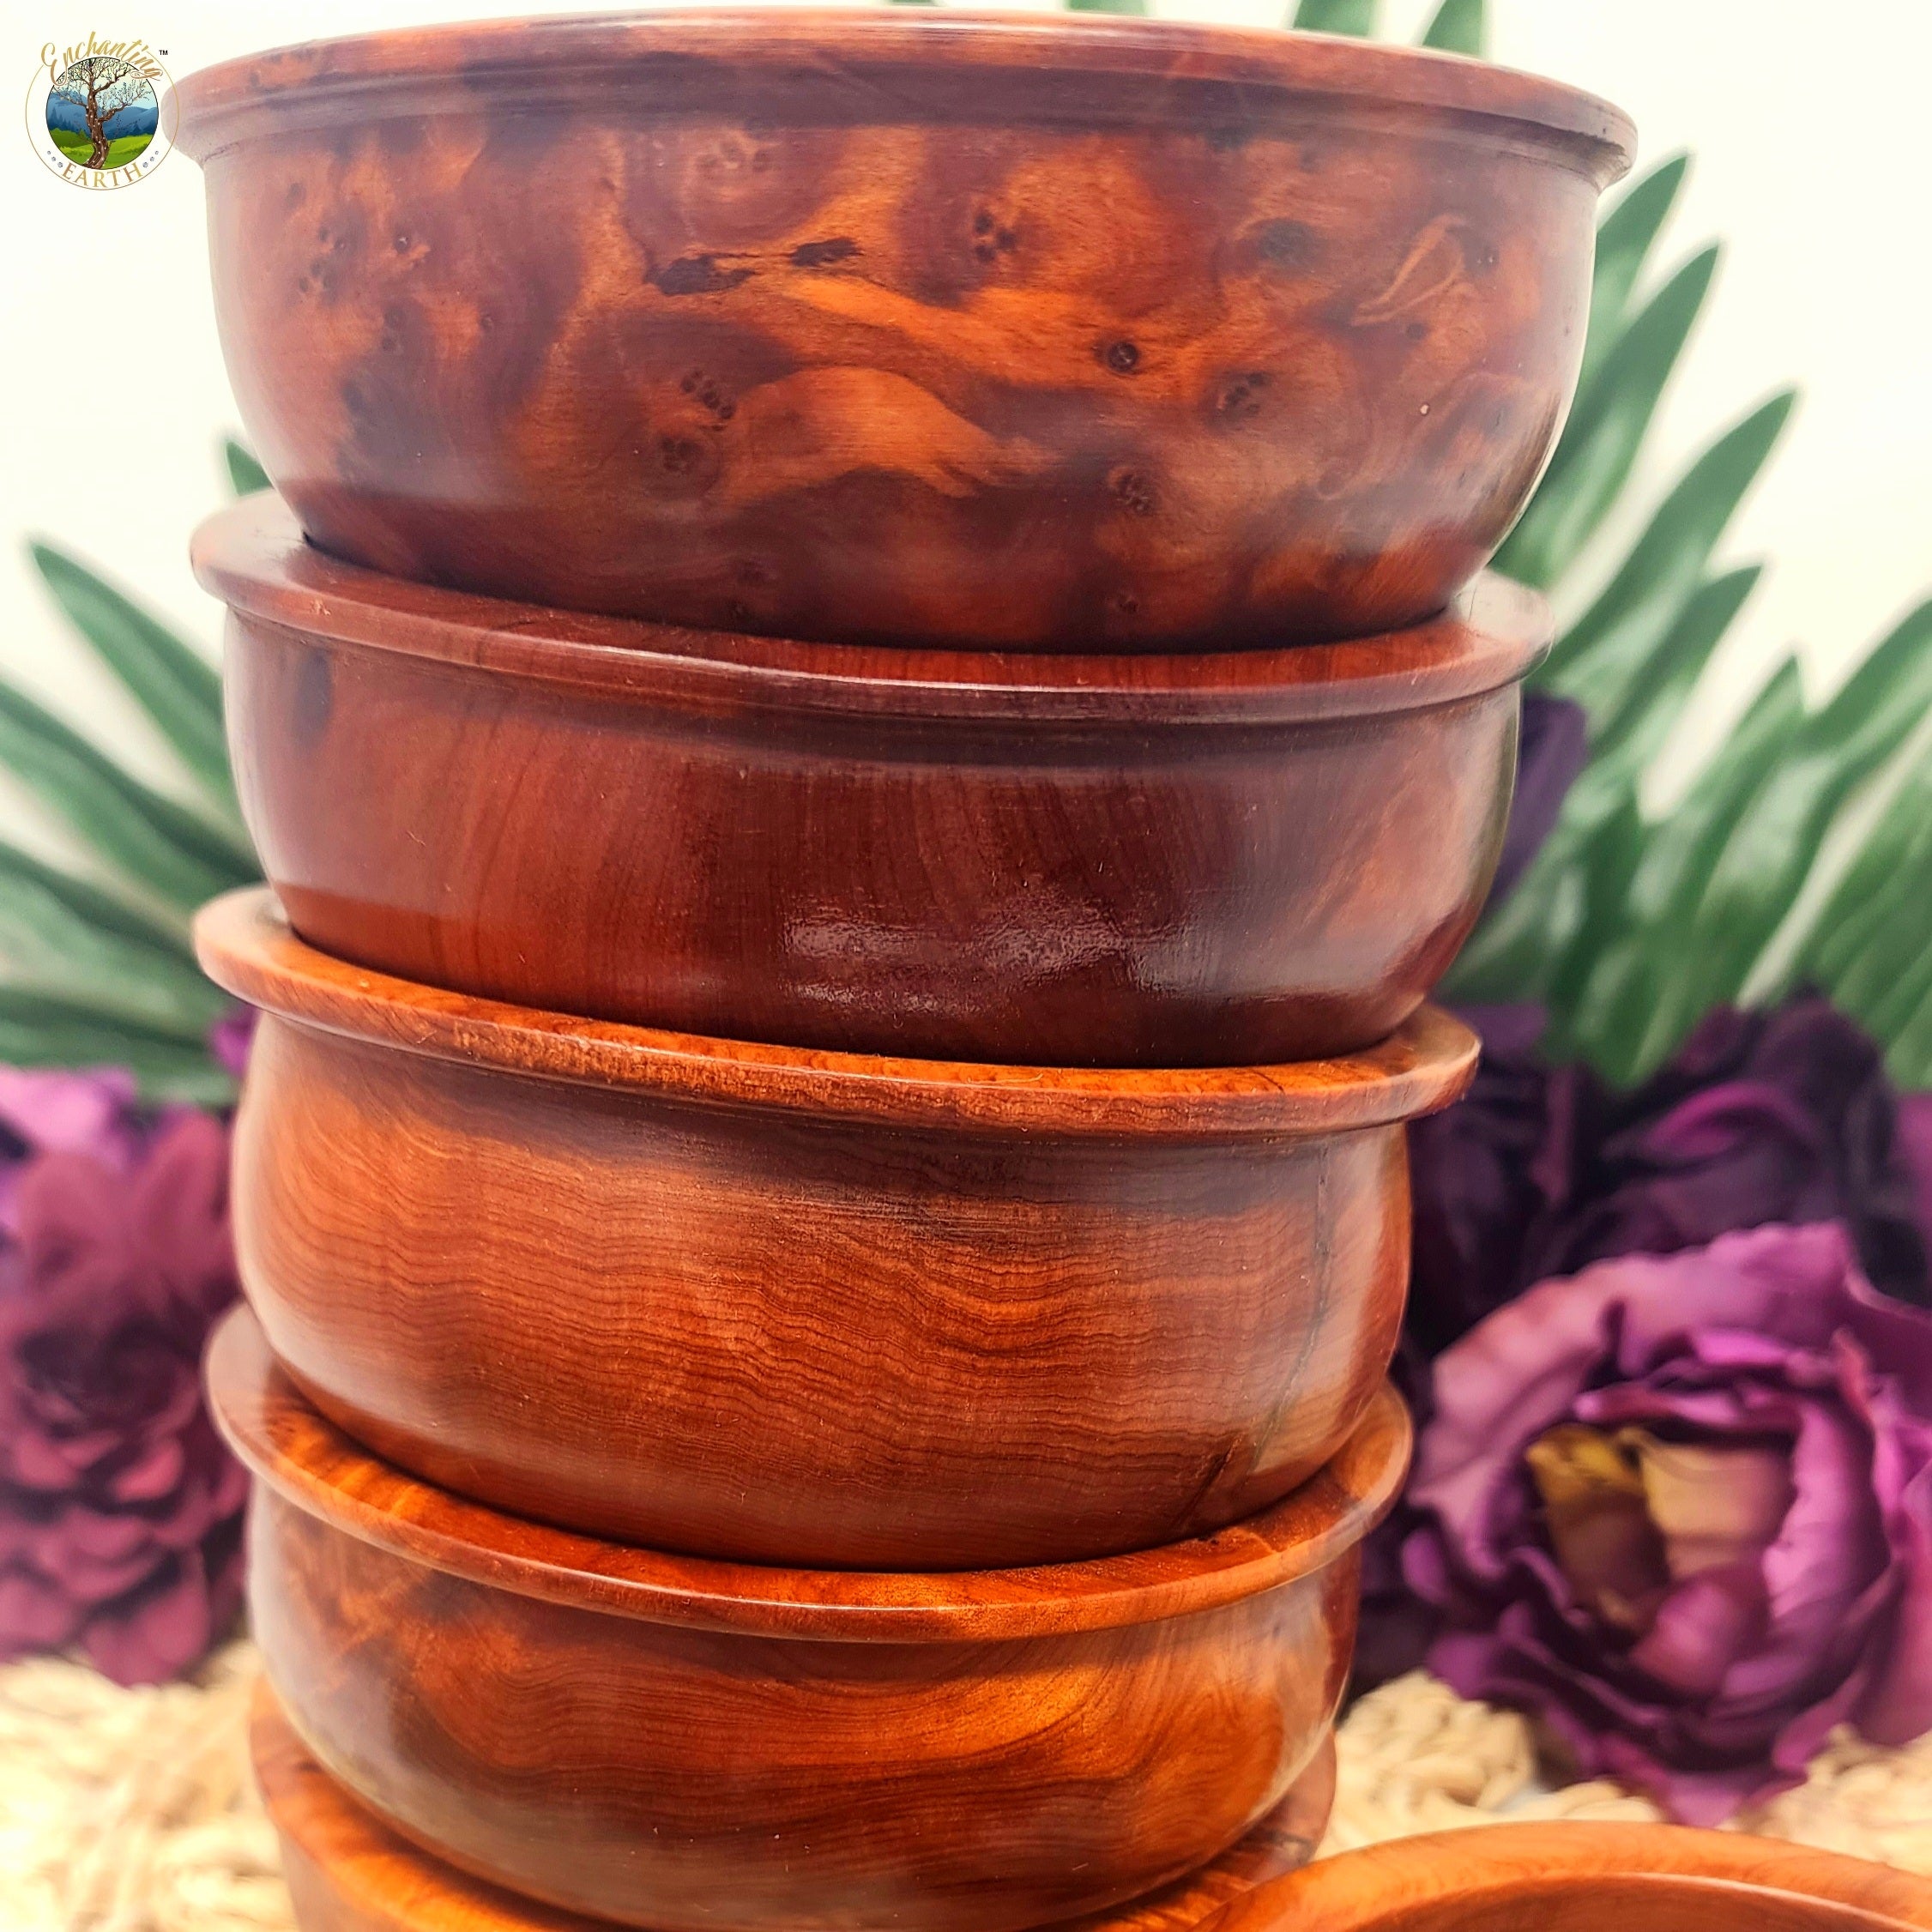 Thuya Wood Bowl for Storing Crystals and Elevating your Mood